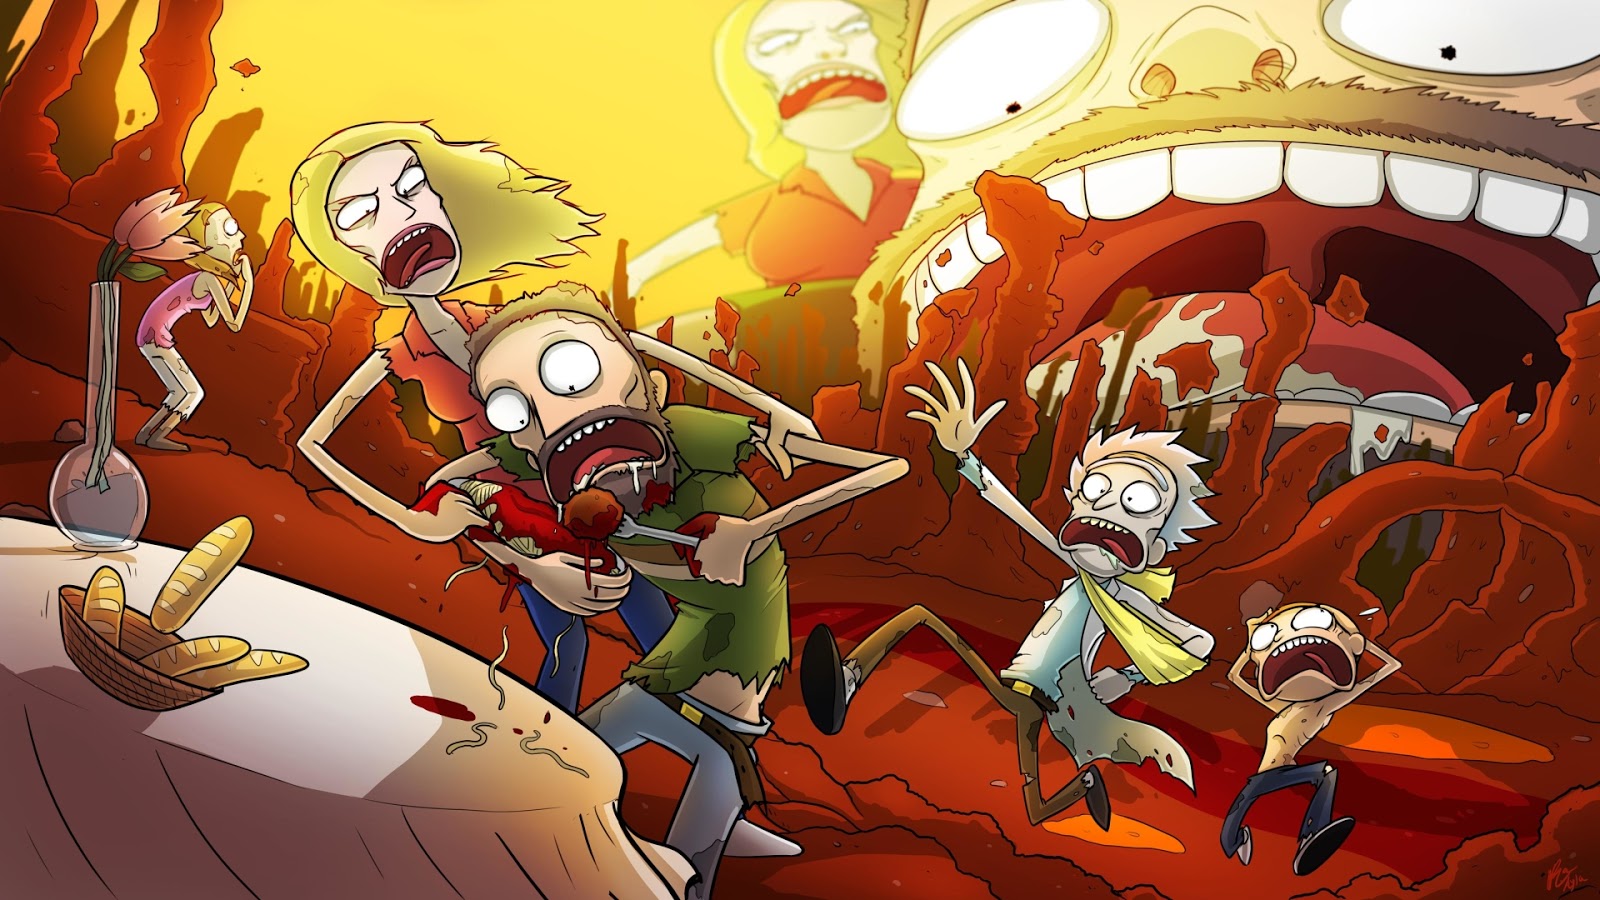 50 1080p Rick And Morty Hd Wallpapers 2020 Hd Backgrounds For